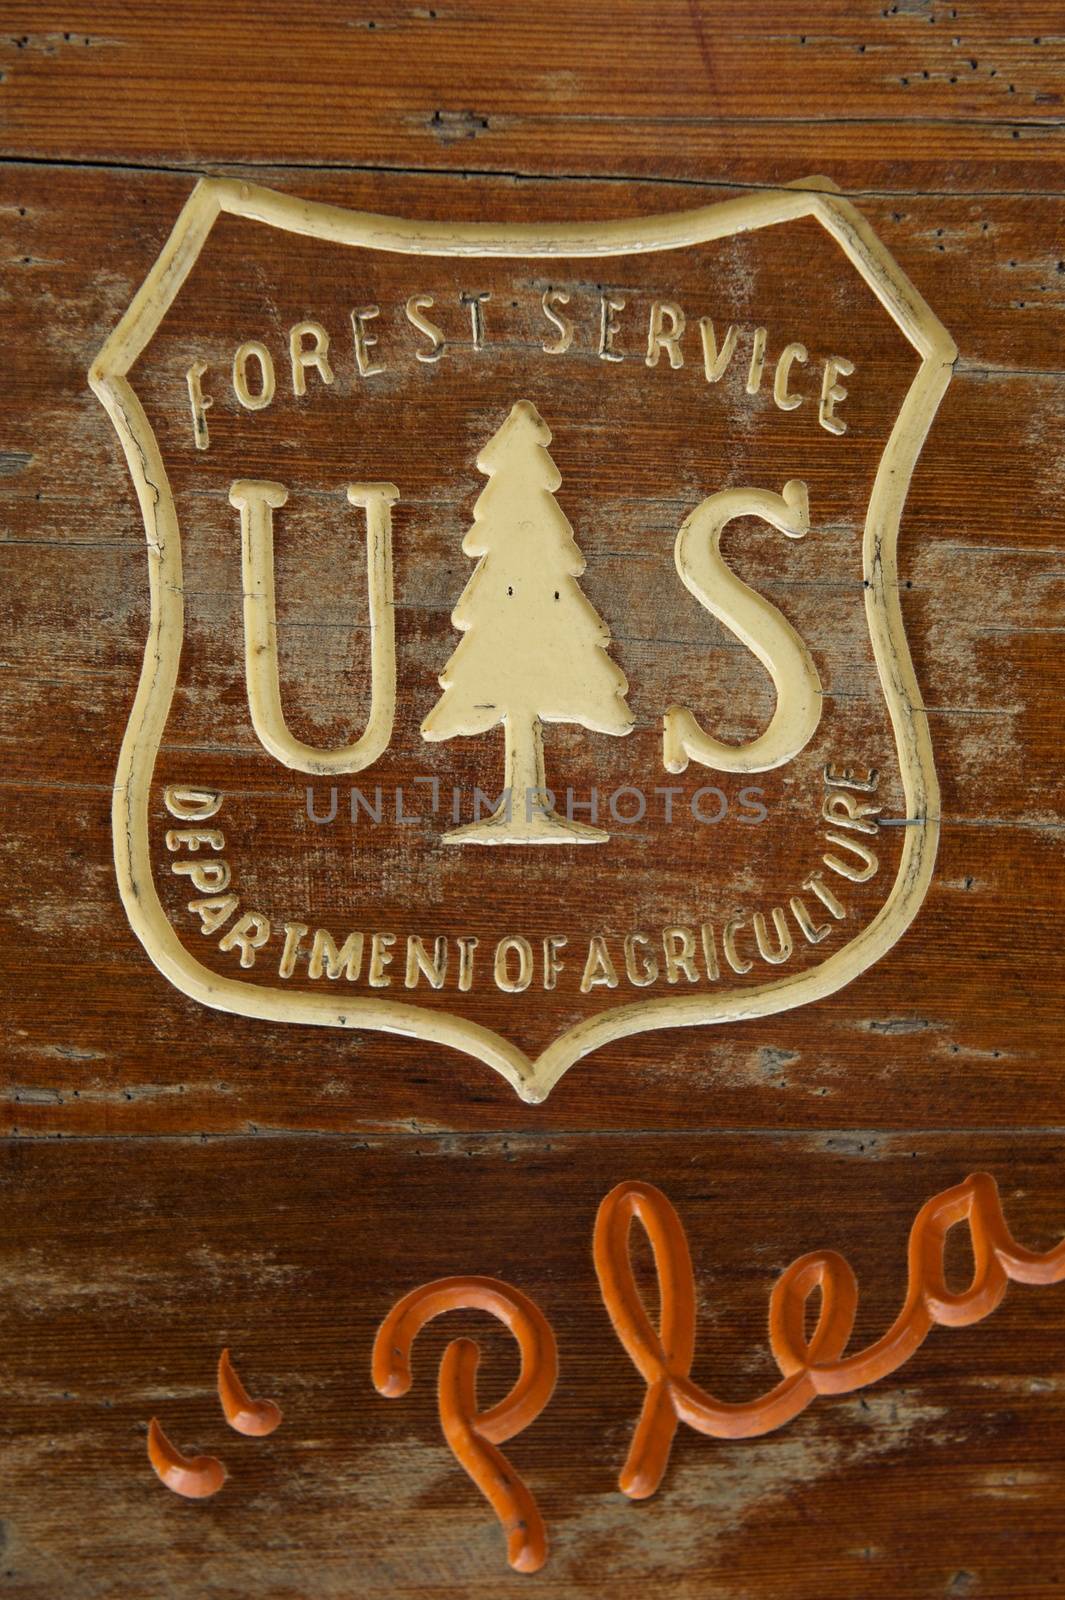 US Forest Service Wooden Sign by pixelsnap